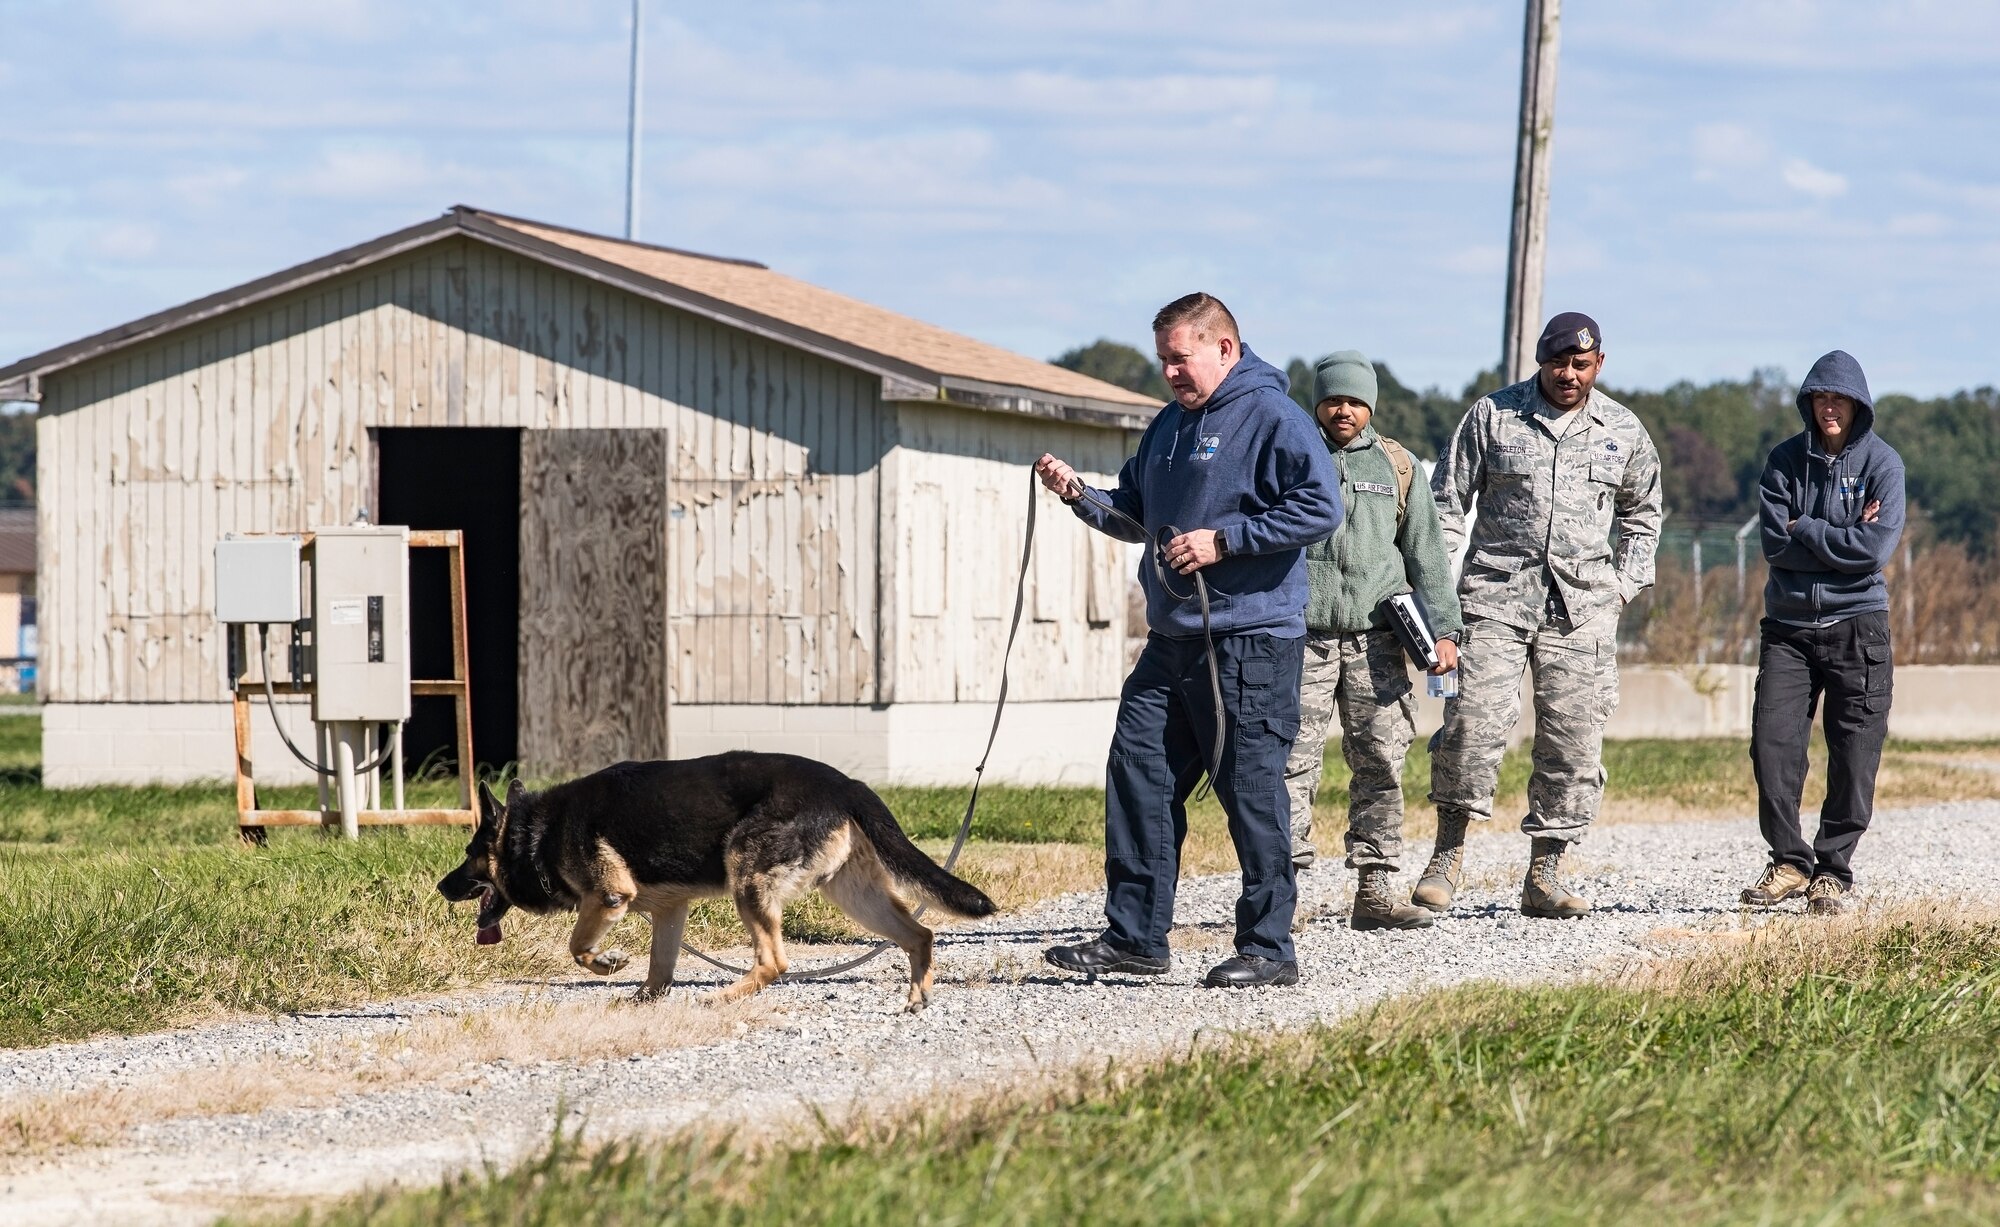 Cpl. Dale Trotter, Worcester County, Md., Sheriff’s Department K-9 Unit handler, along with his partner, “Edo,” a nine-year-old German Shepherd explosive detection dog, search for hidden explosives Oct. 24, 2018, at Dover Air Force Base, Del. Standing in the background from left, Staff Sgt. Jared Brown, 436th Security Forces Squadron military working dog trainer, Tech. Sgt. Dominique Singleton, 436th SFS MWD kennel master, and Sgt. Katie Edgar, Worchester County, Maryland Sheriff’s Department K-9 Unit supervisor, watched Trotter work Edo as he searched for hidden explosives. (U.S. Air Force photo by Roland Balik)